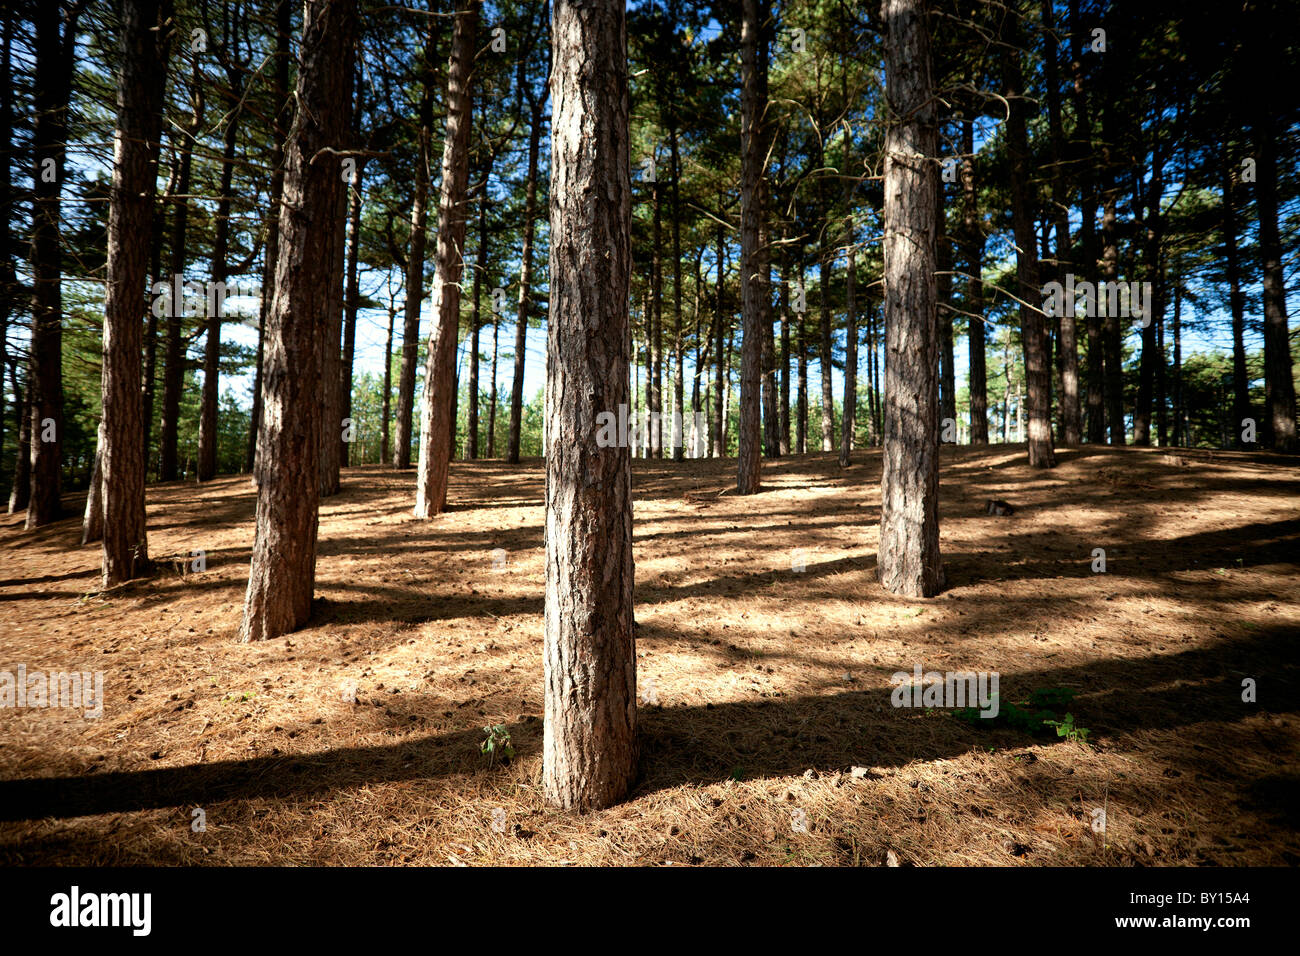 The coastal pinewoods at Lifeboat Road, Formby Point, part of the Red Squirrel refuge on the Sefton Coast and situated to the north of Liverpool, uk. Stock Photo